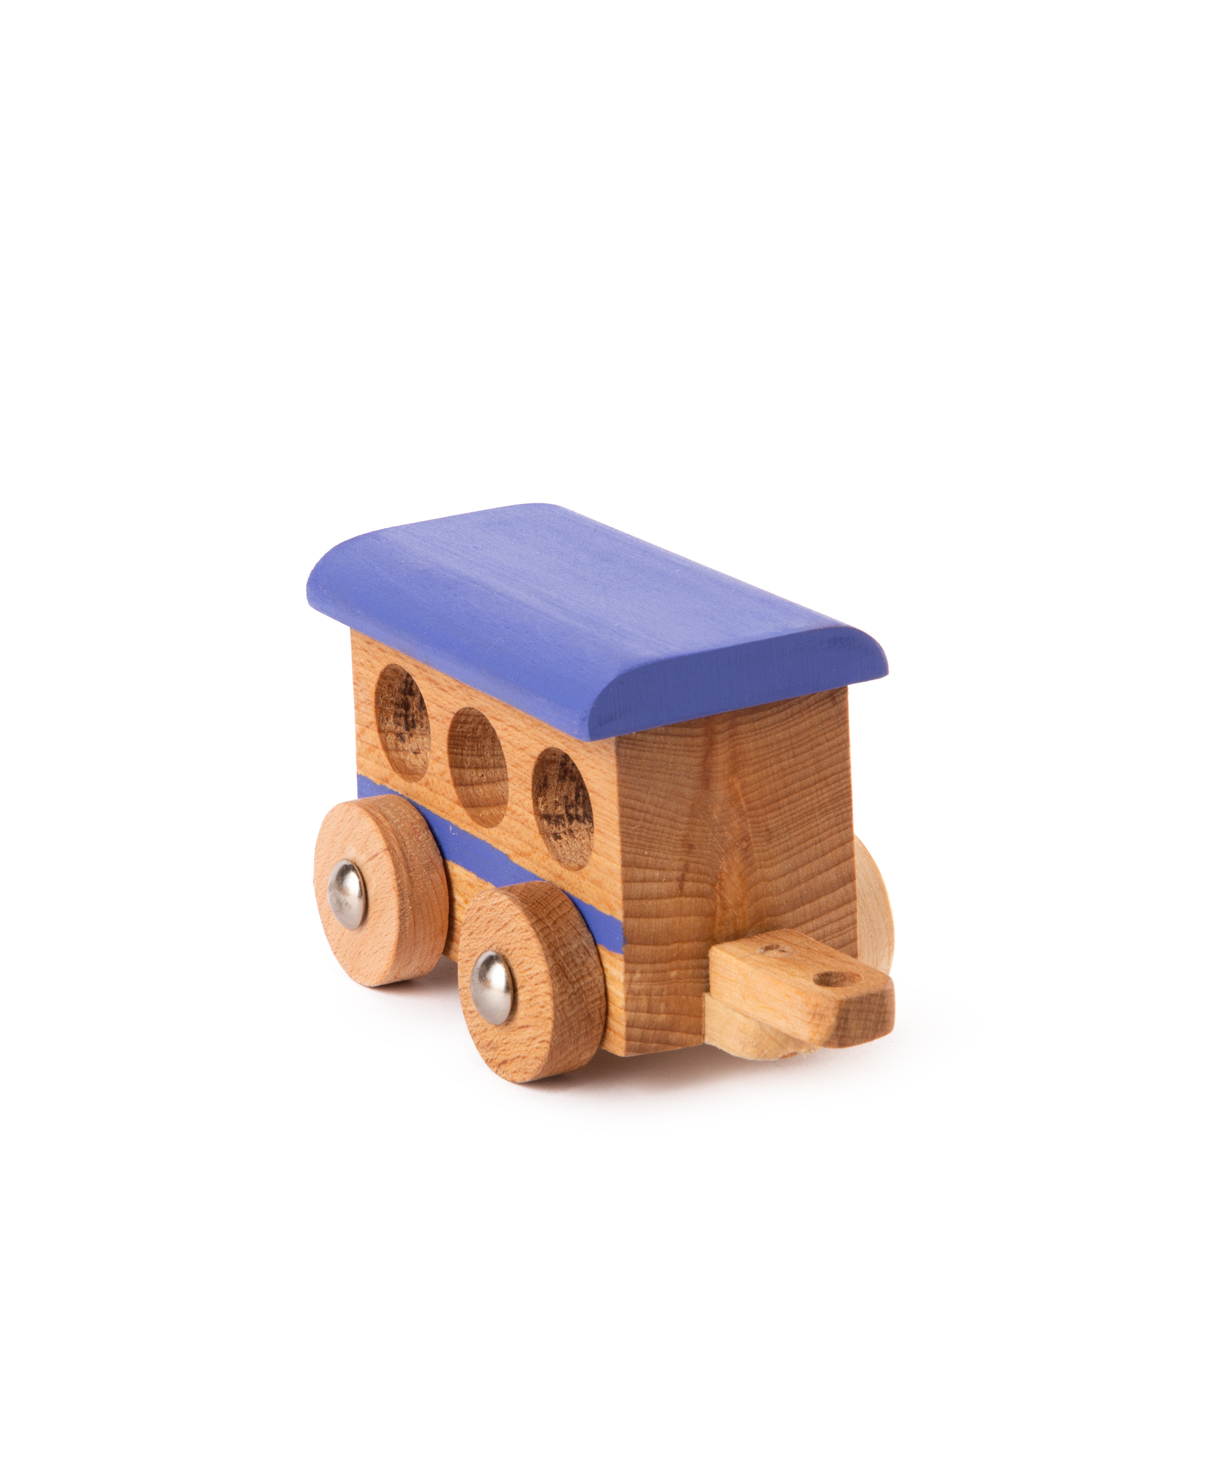 Toy `I'm wooden toys` wooden train